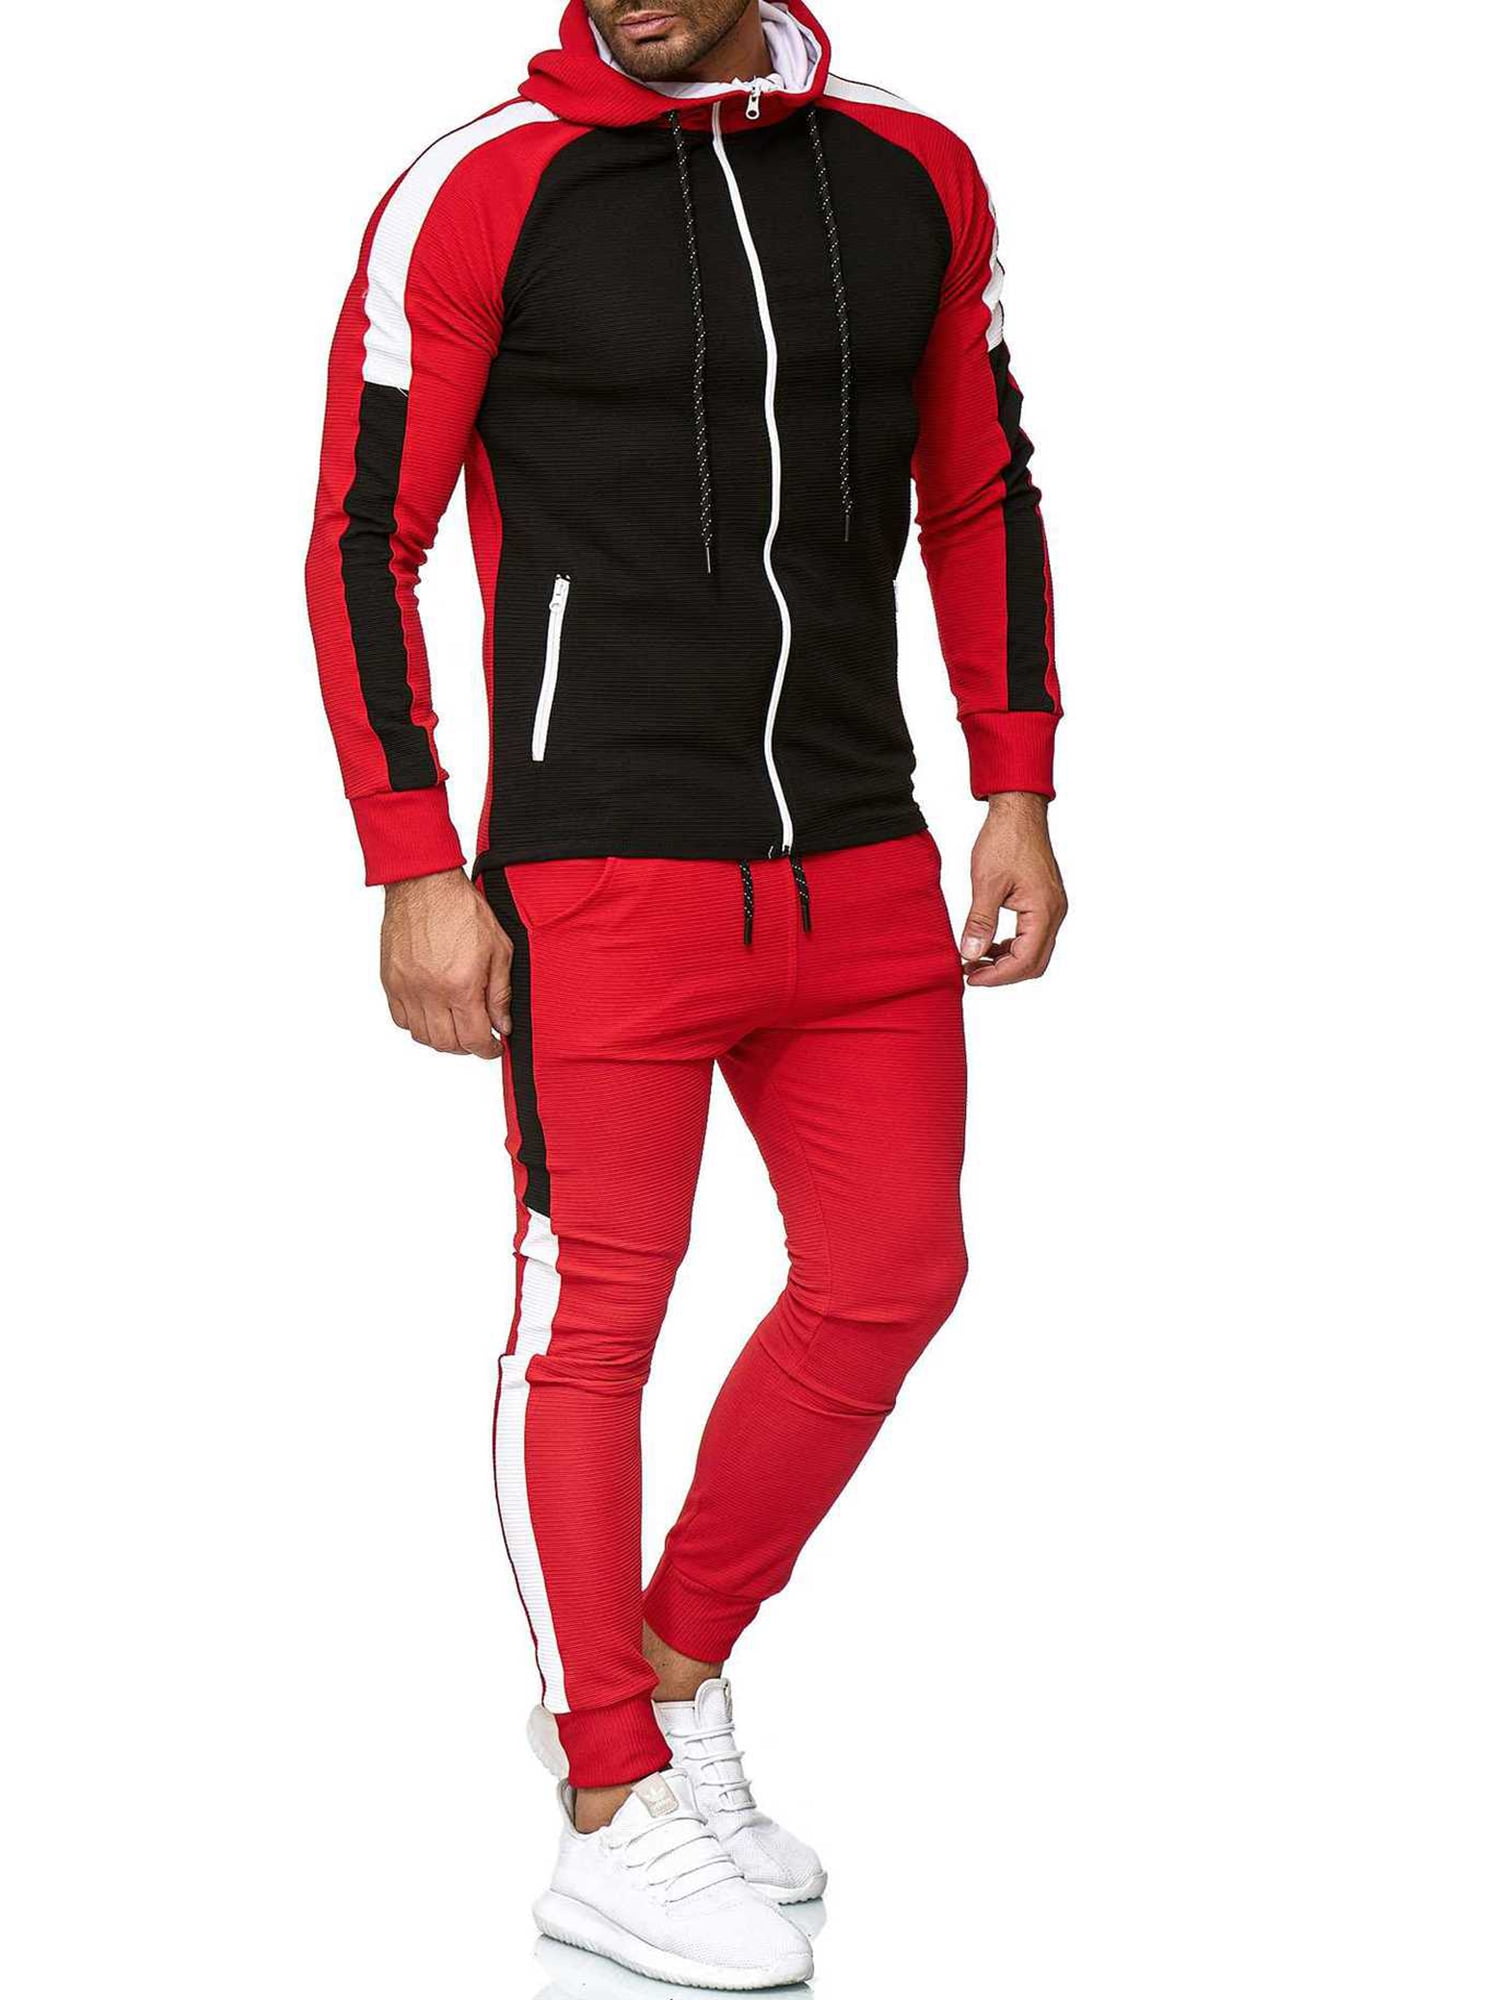 Coolred-Men Plus Size Tank Solid-Colored Summer Jogger Sweatsuit Set